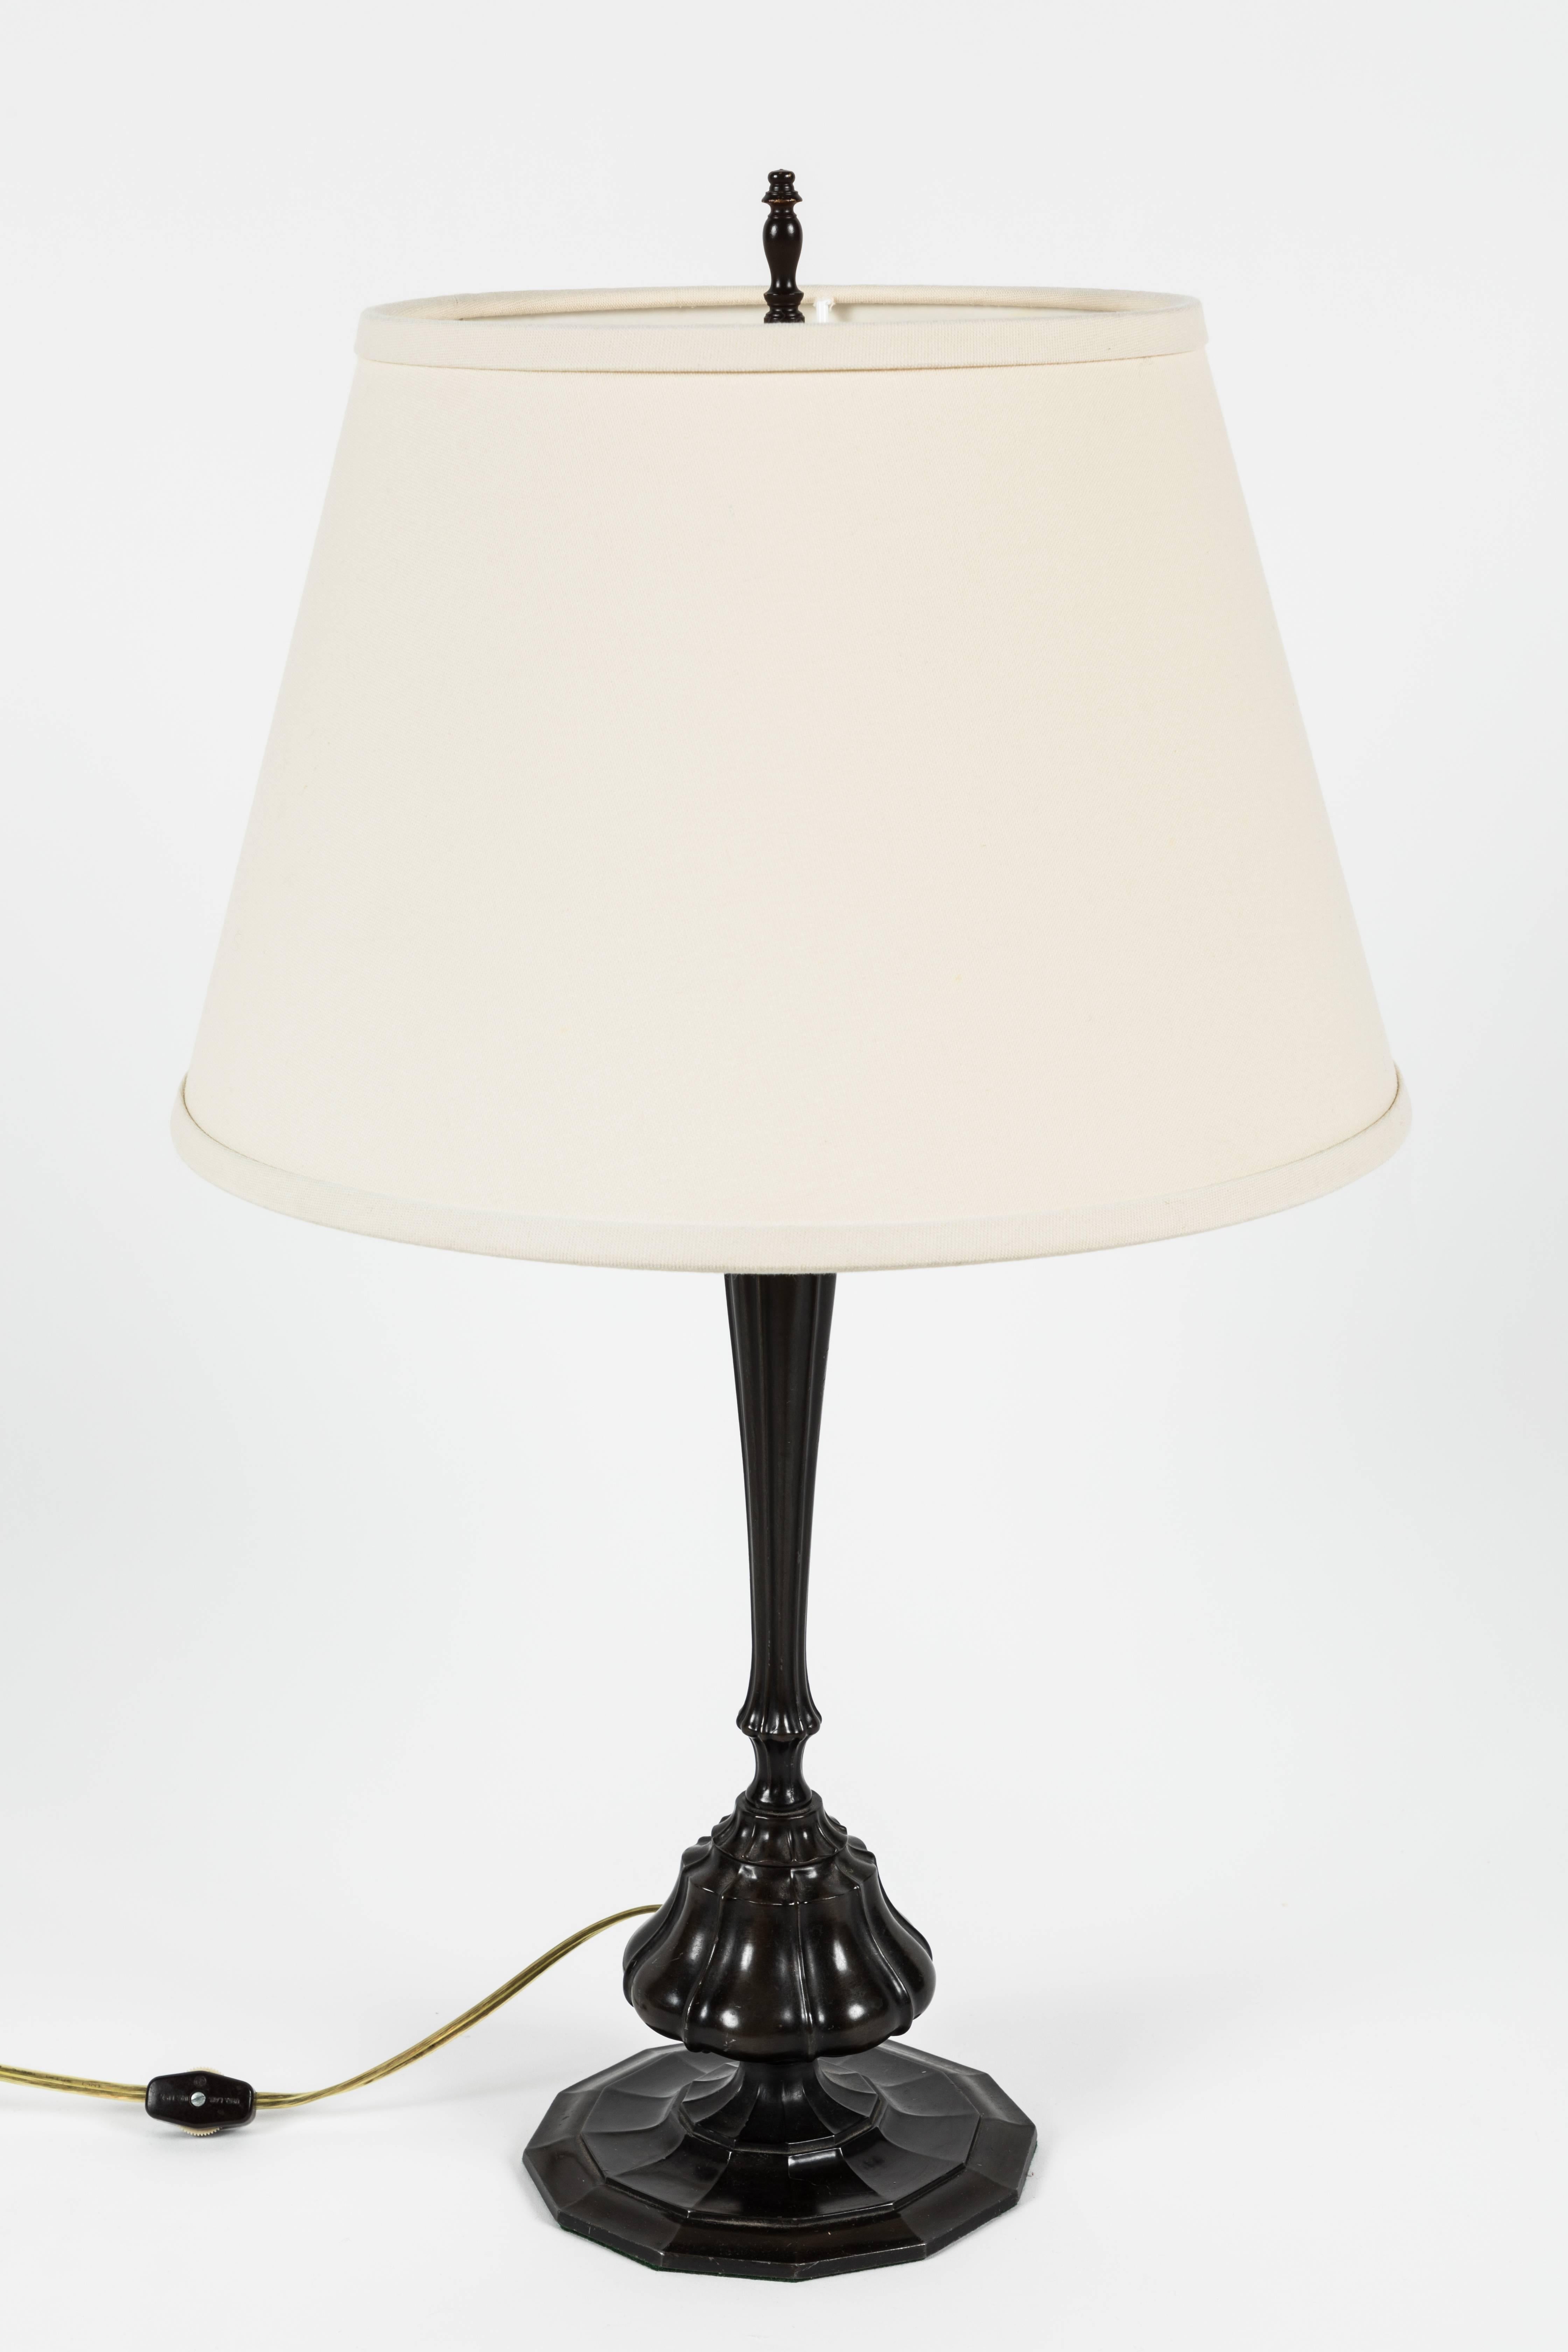 Just Andersen Table Lamp In Good Condition For Sale In LOS ANGELES, CA